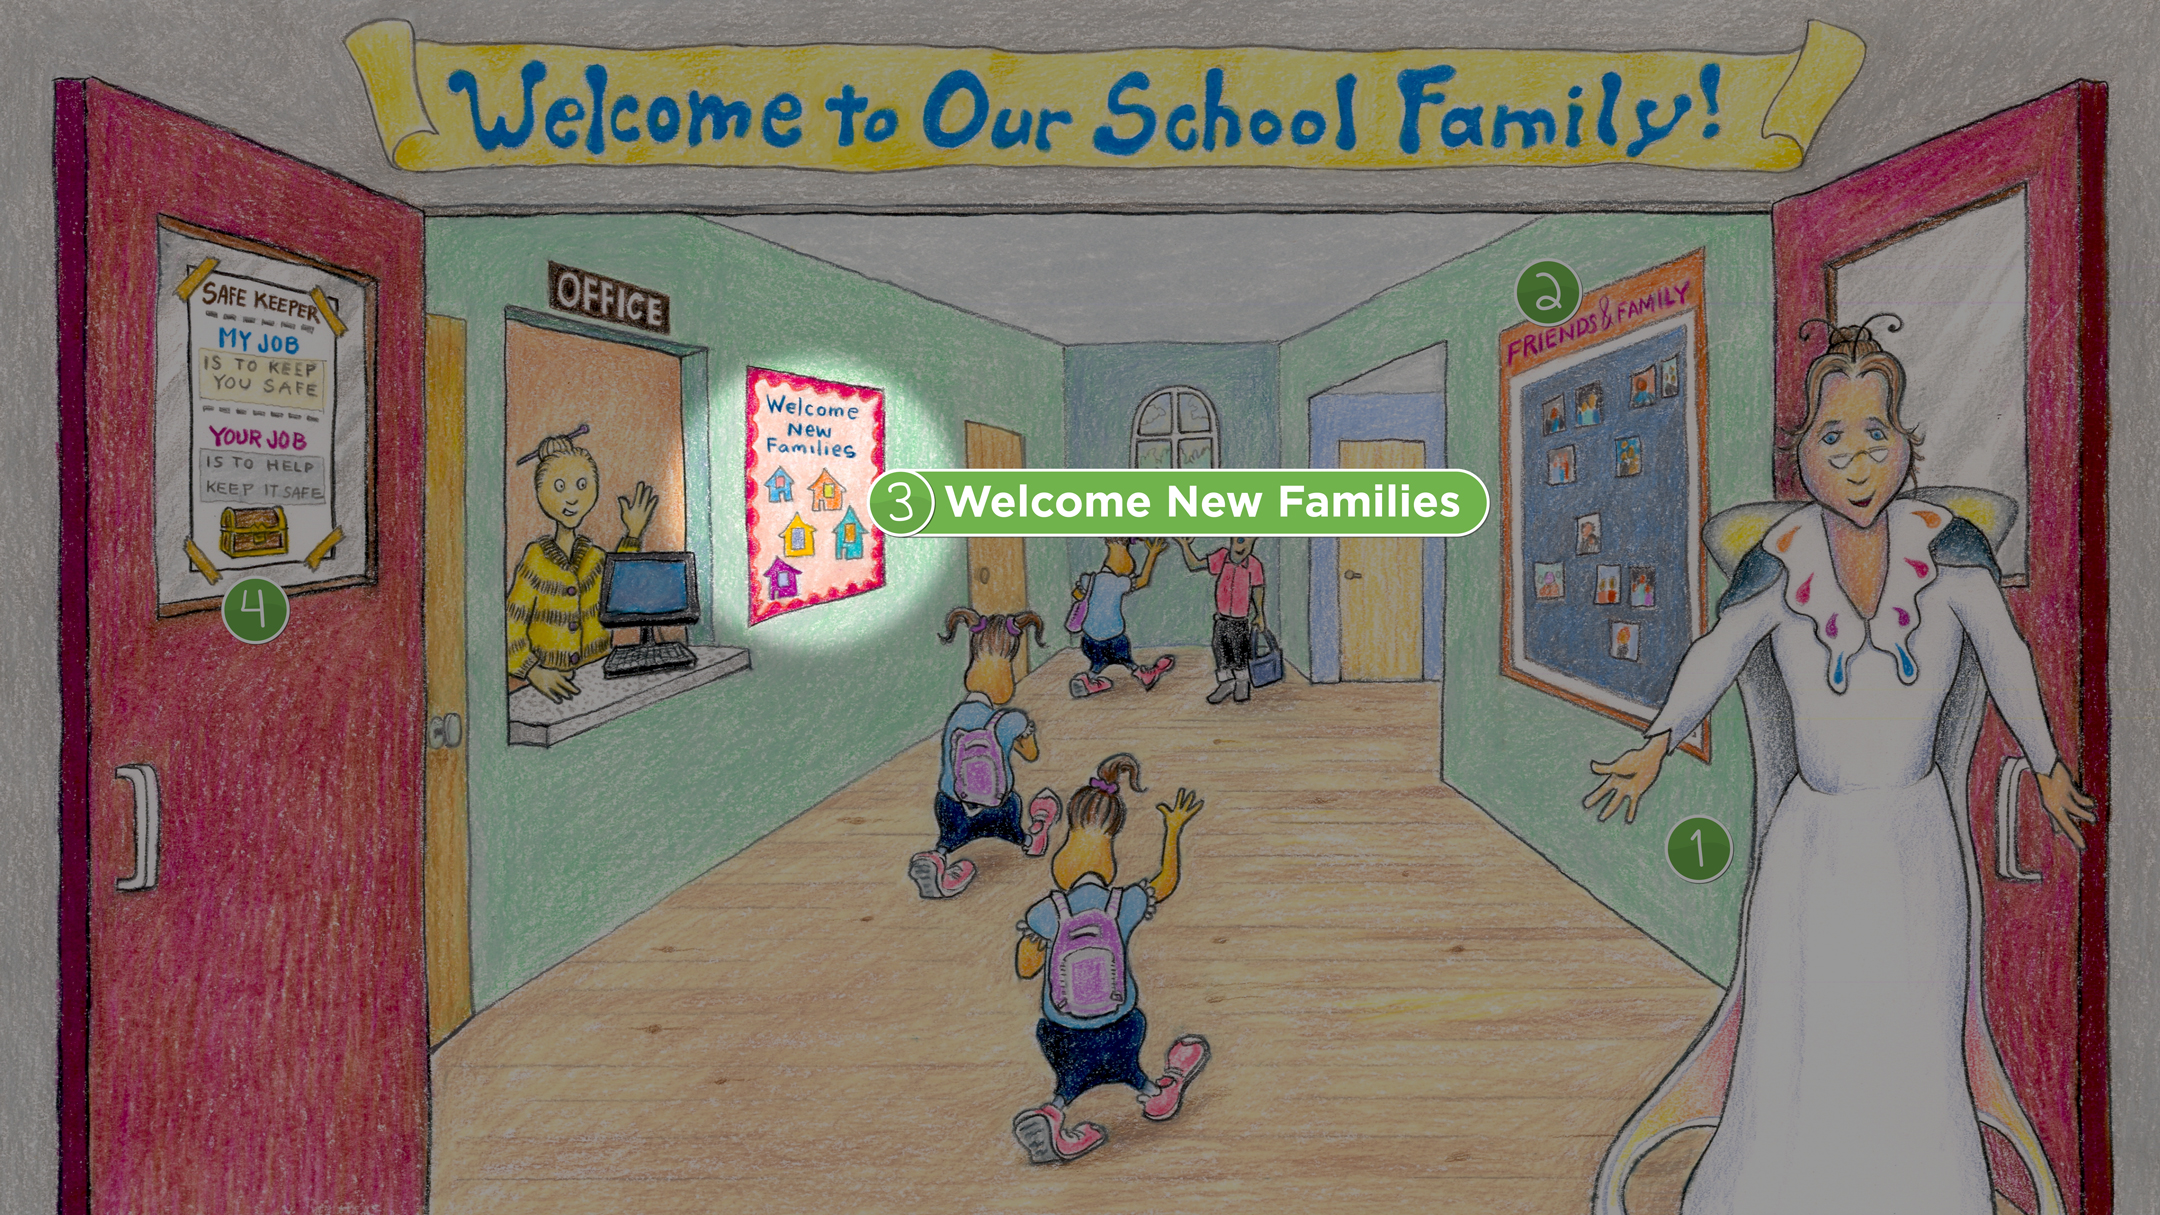 Entrance: Welcome New Families